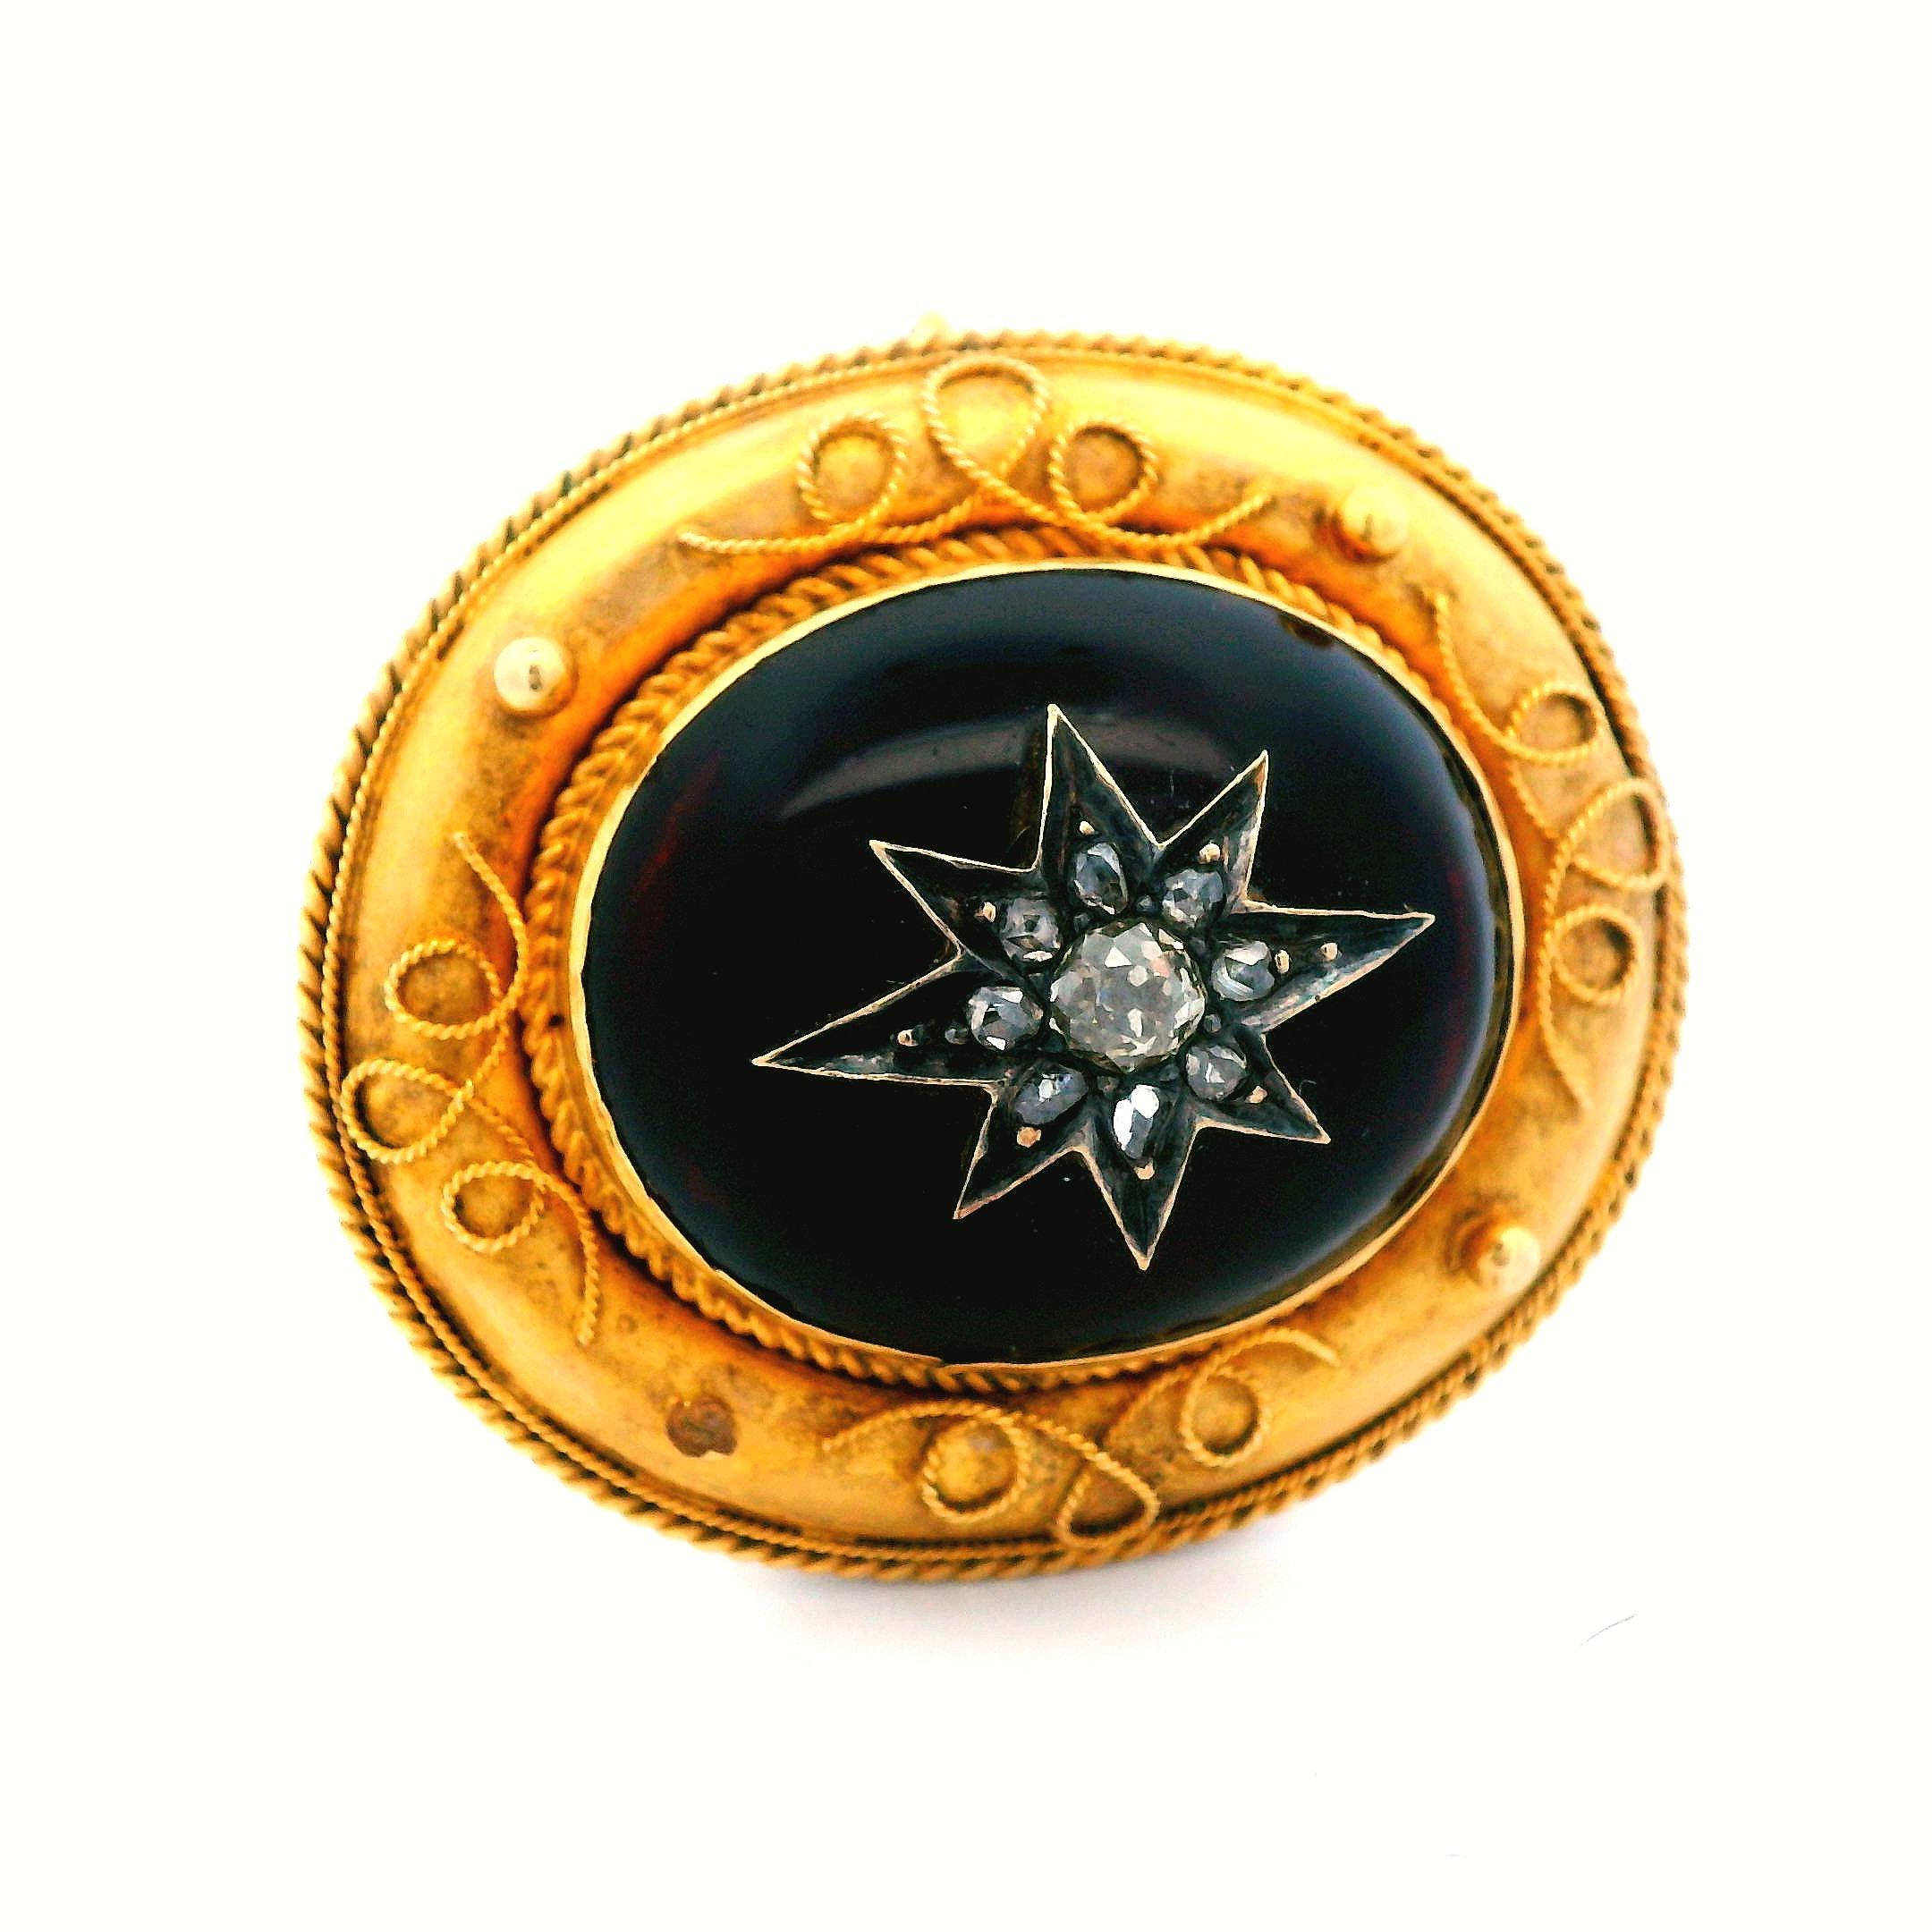 This gorgeous Etruscan pin is made in 18k yellow gold and features both garnet and diamond. This pin comes in great condition overall, however, one of the 4 gold beads is missing. This would be an easy fix for someone willing to spend the time to